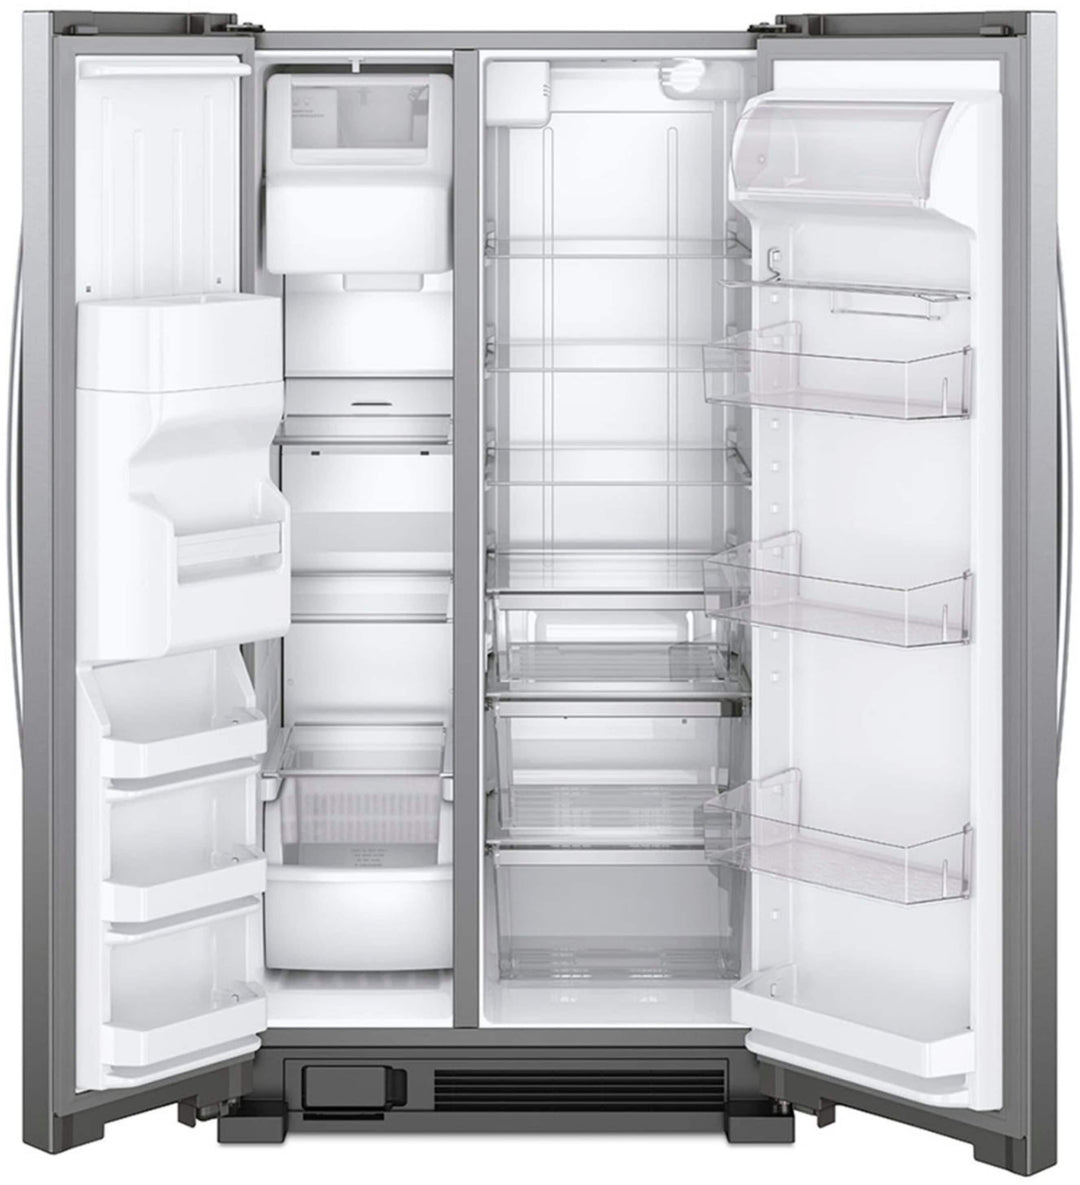 Whirlpool - 24.6 Cu. Ft. Side-by-Side Refrigerator - Stainless steel_5